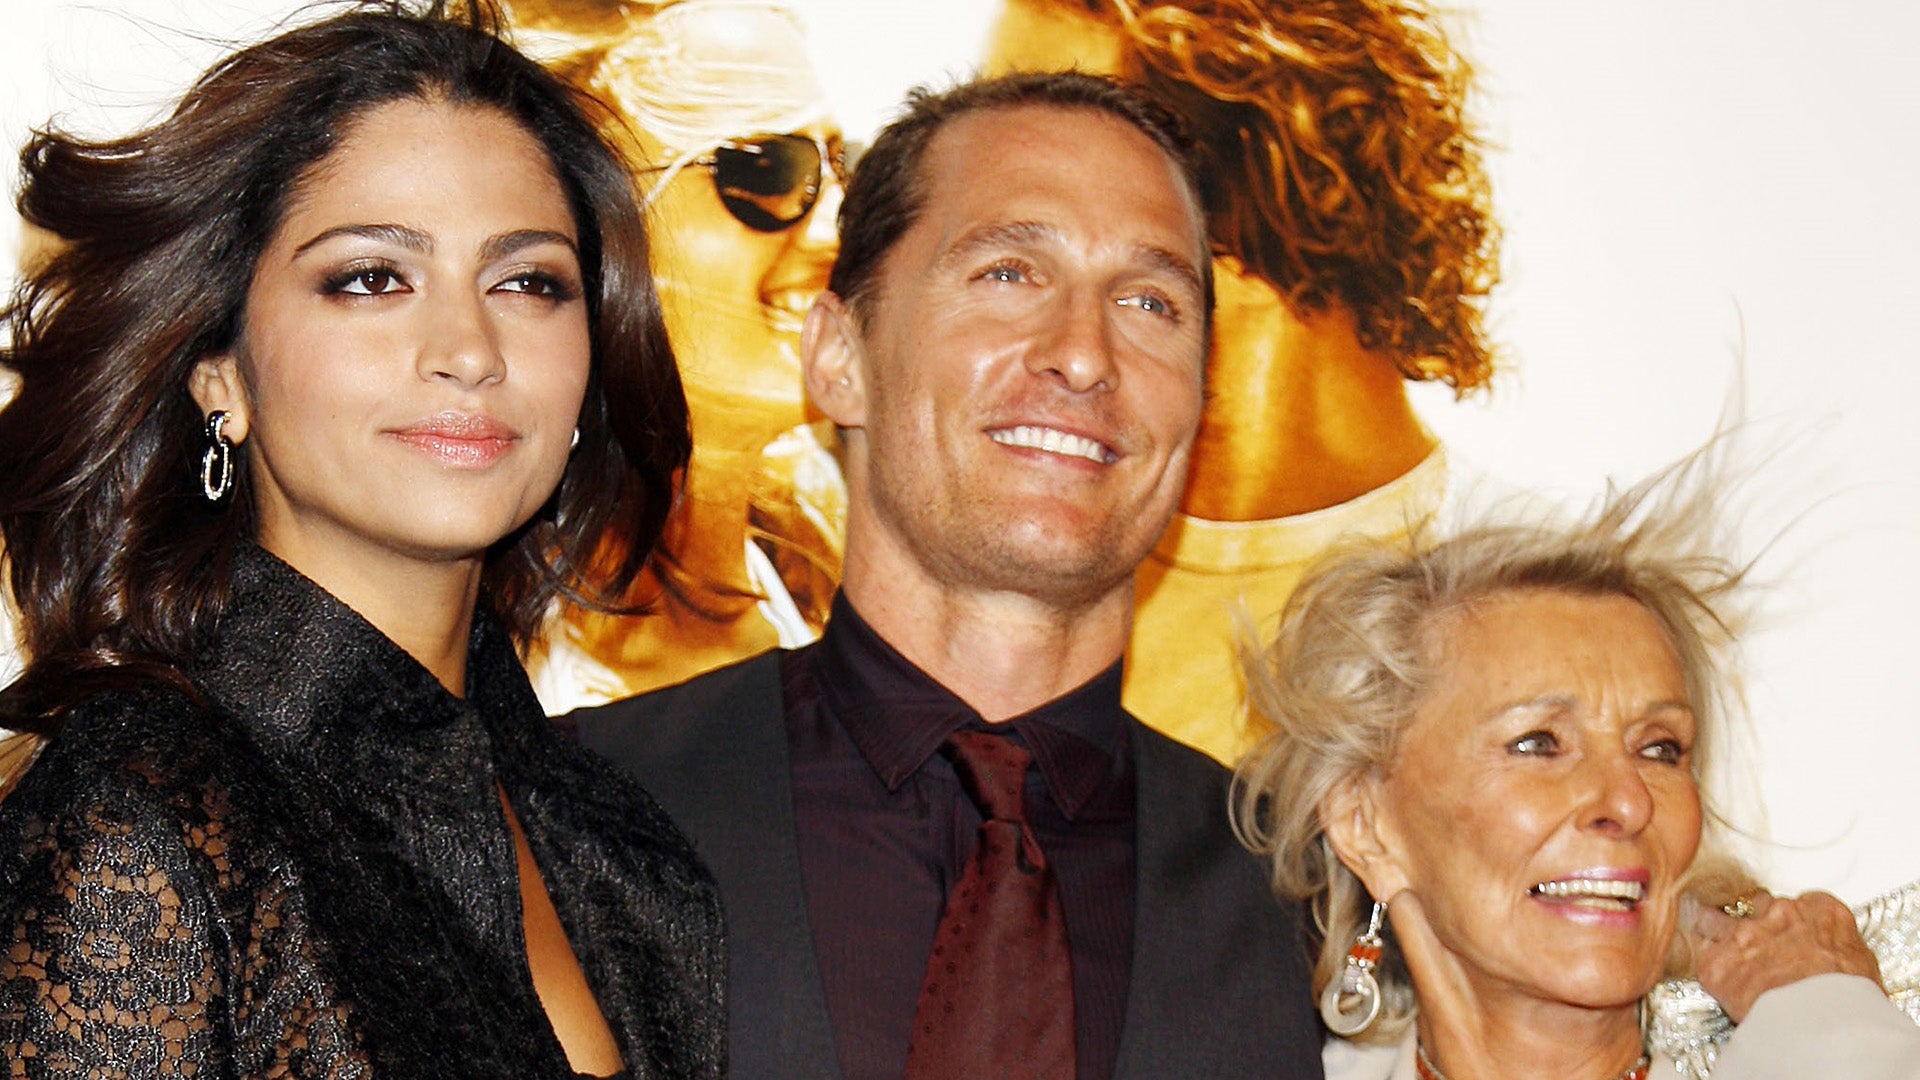 Matthew McConaughey Says He Was Estranged From His Mom for 8 Years